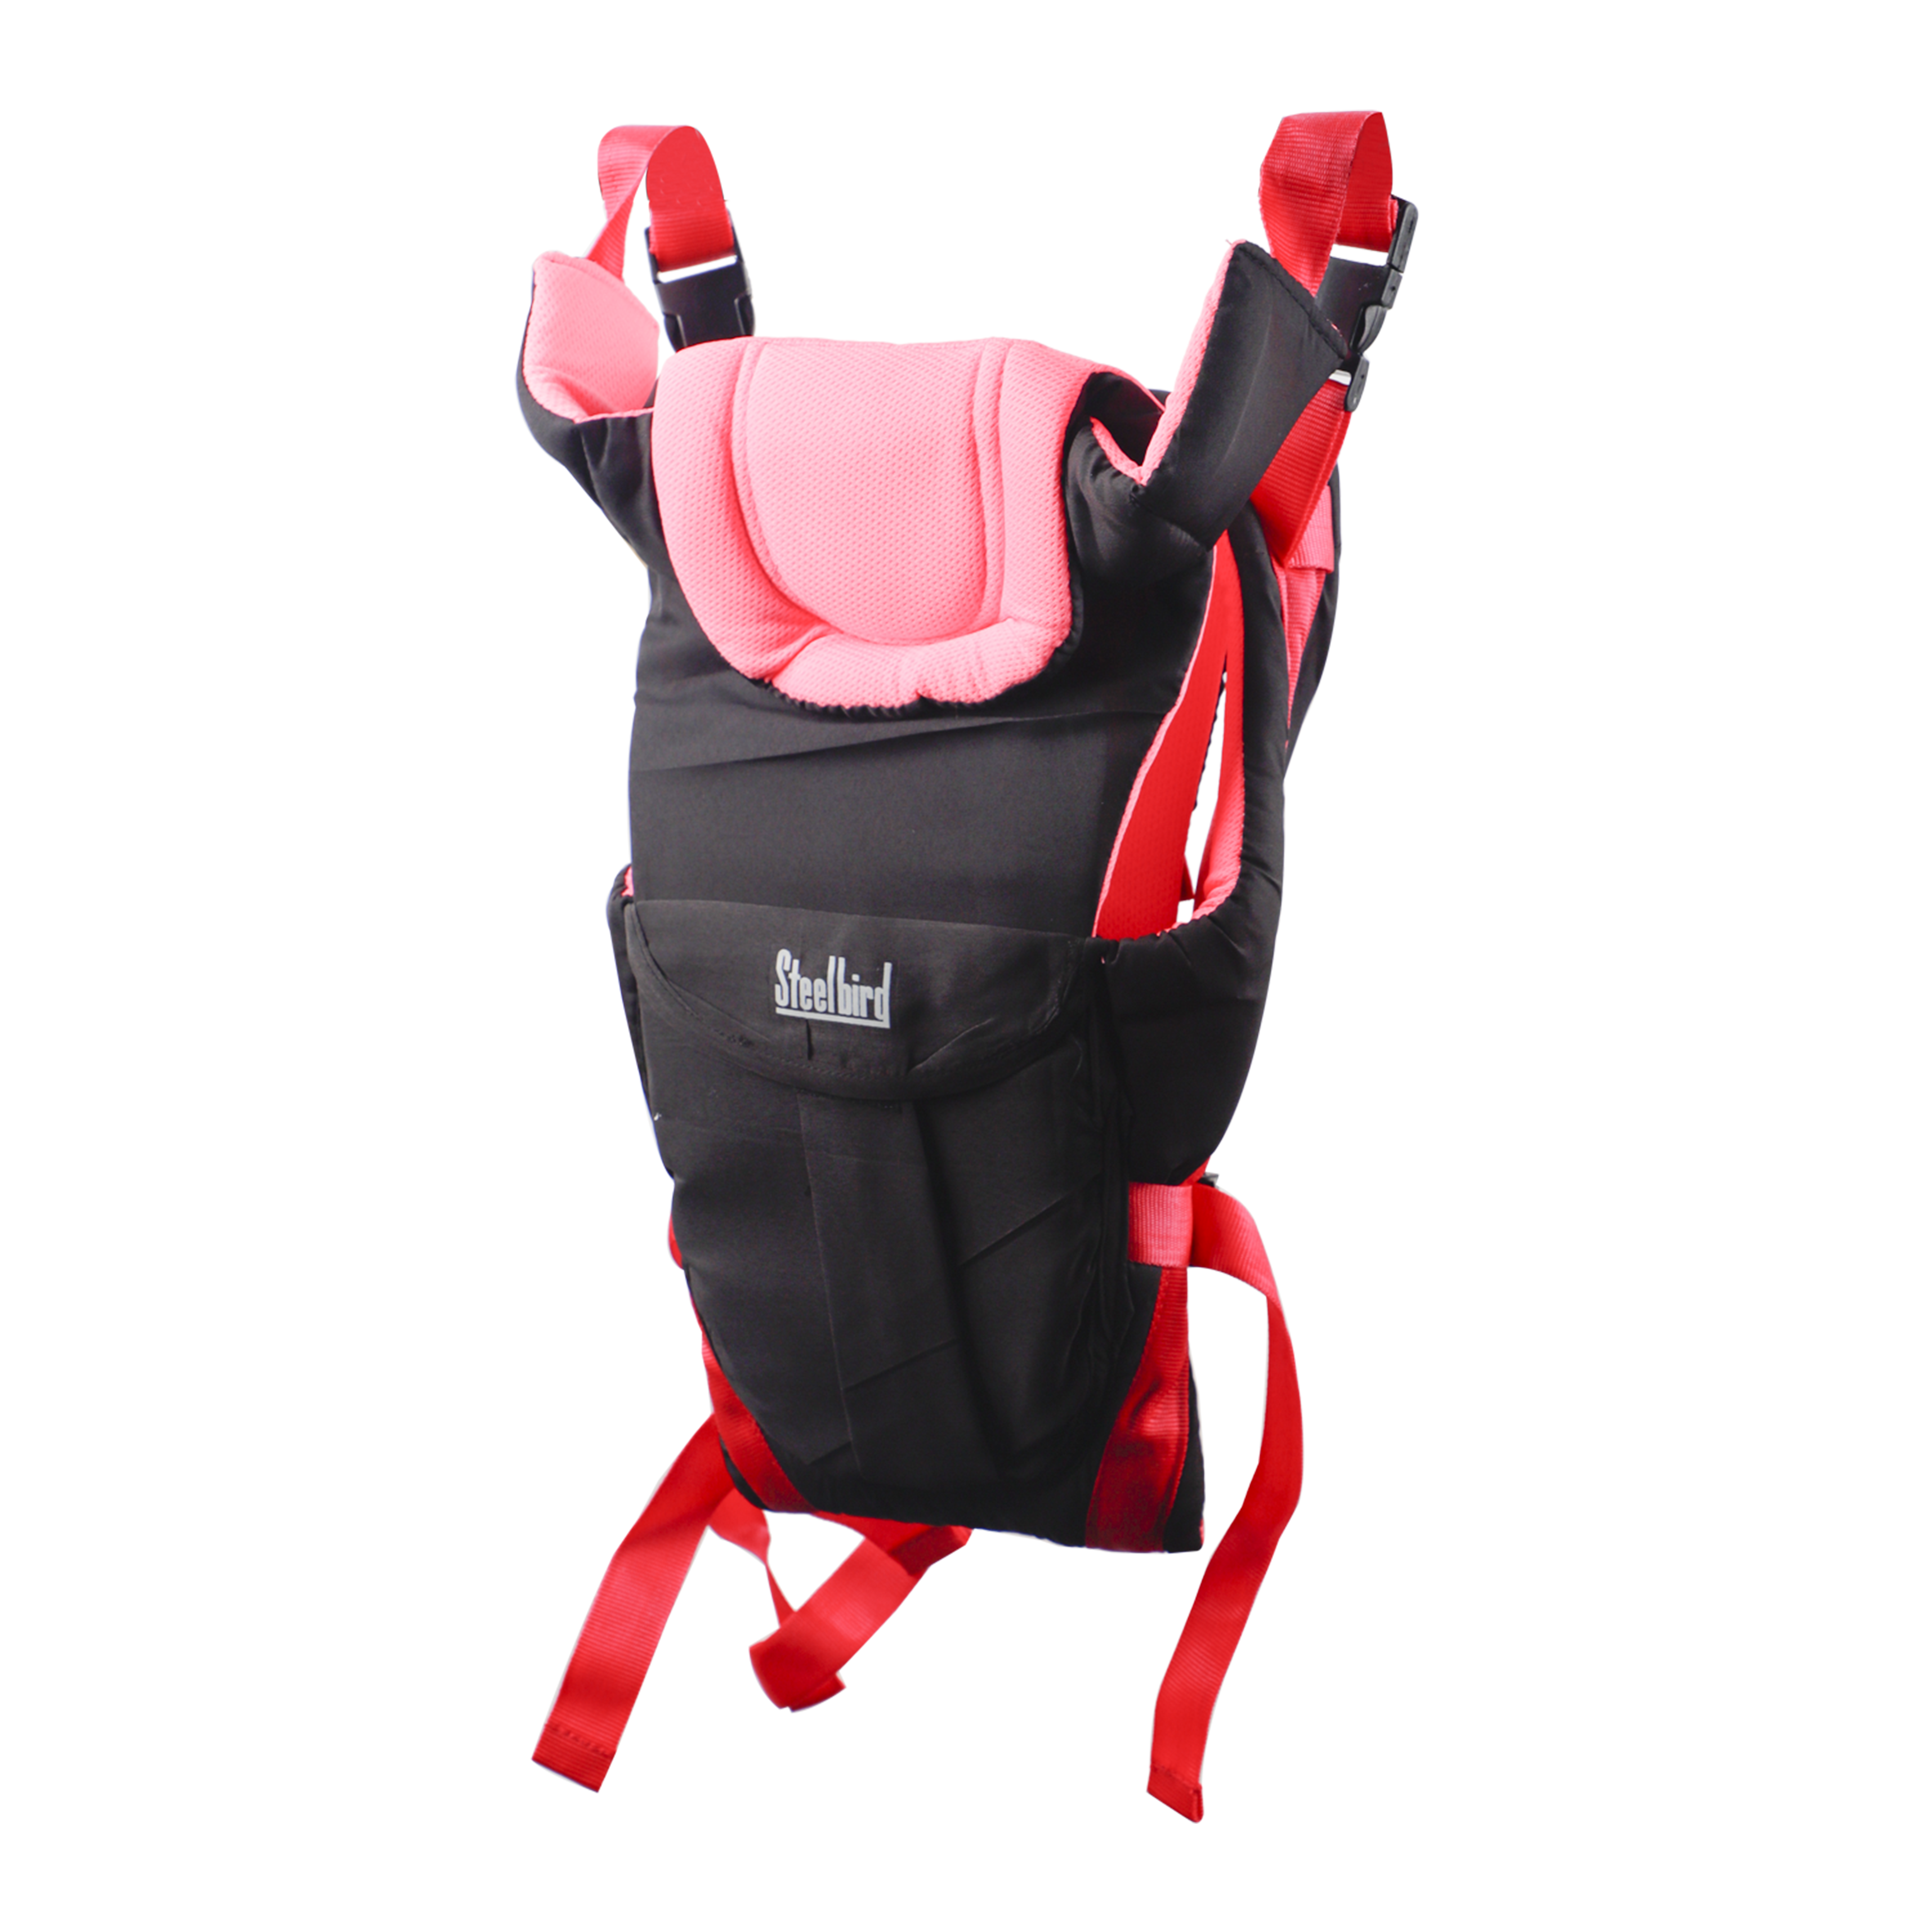 Steelbird Super Four Kids 4-in-1 Adjustable Baby Carrier Cum Kangaroo Bag-Lightweight and Breathable-Back-Front Carrier for Baby with Safety Belt-Max Weight Up to 12 Kg (Pink Black)